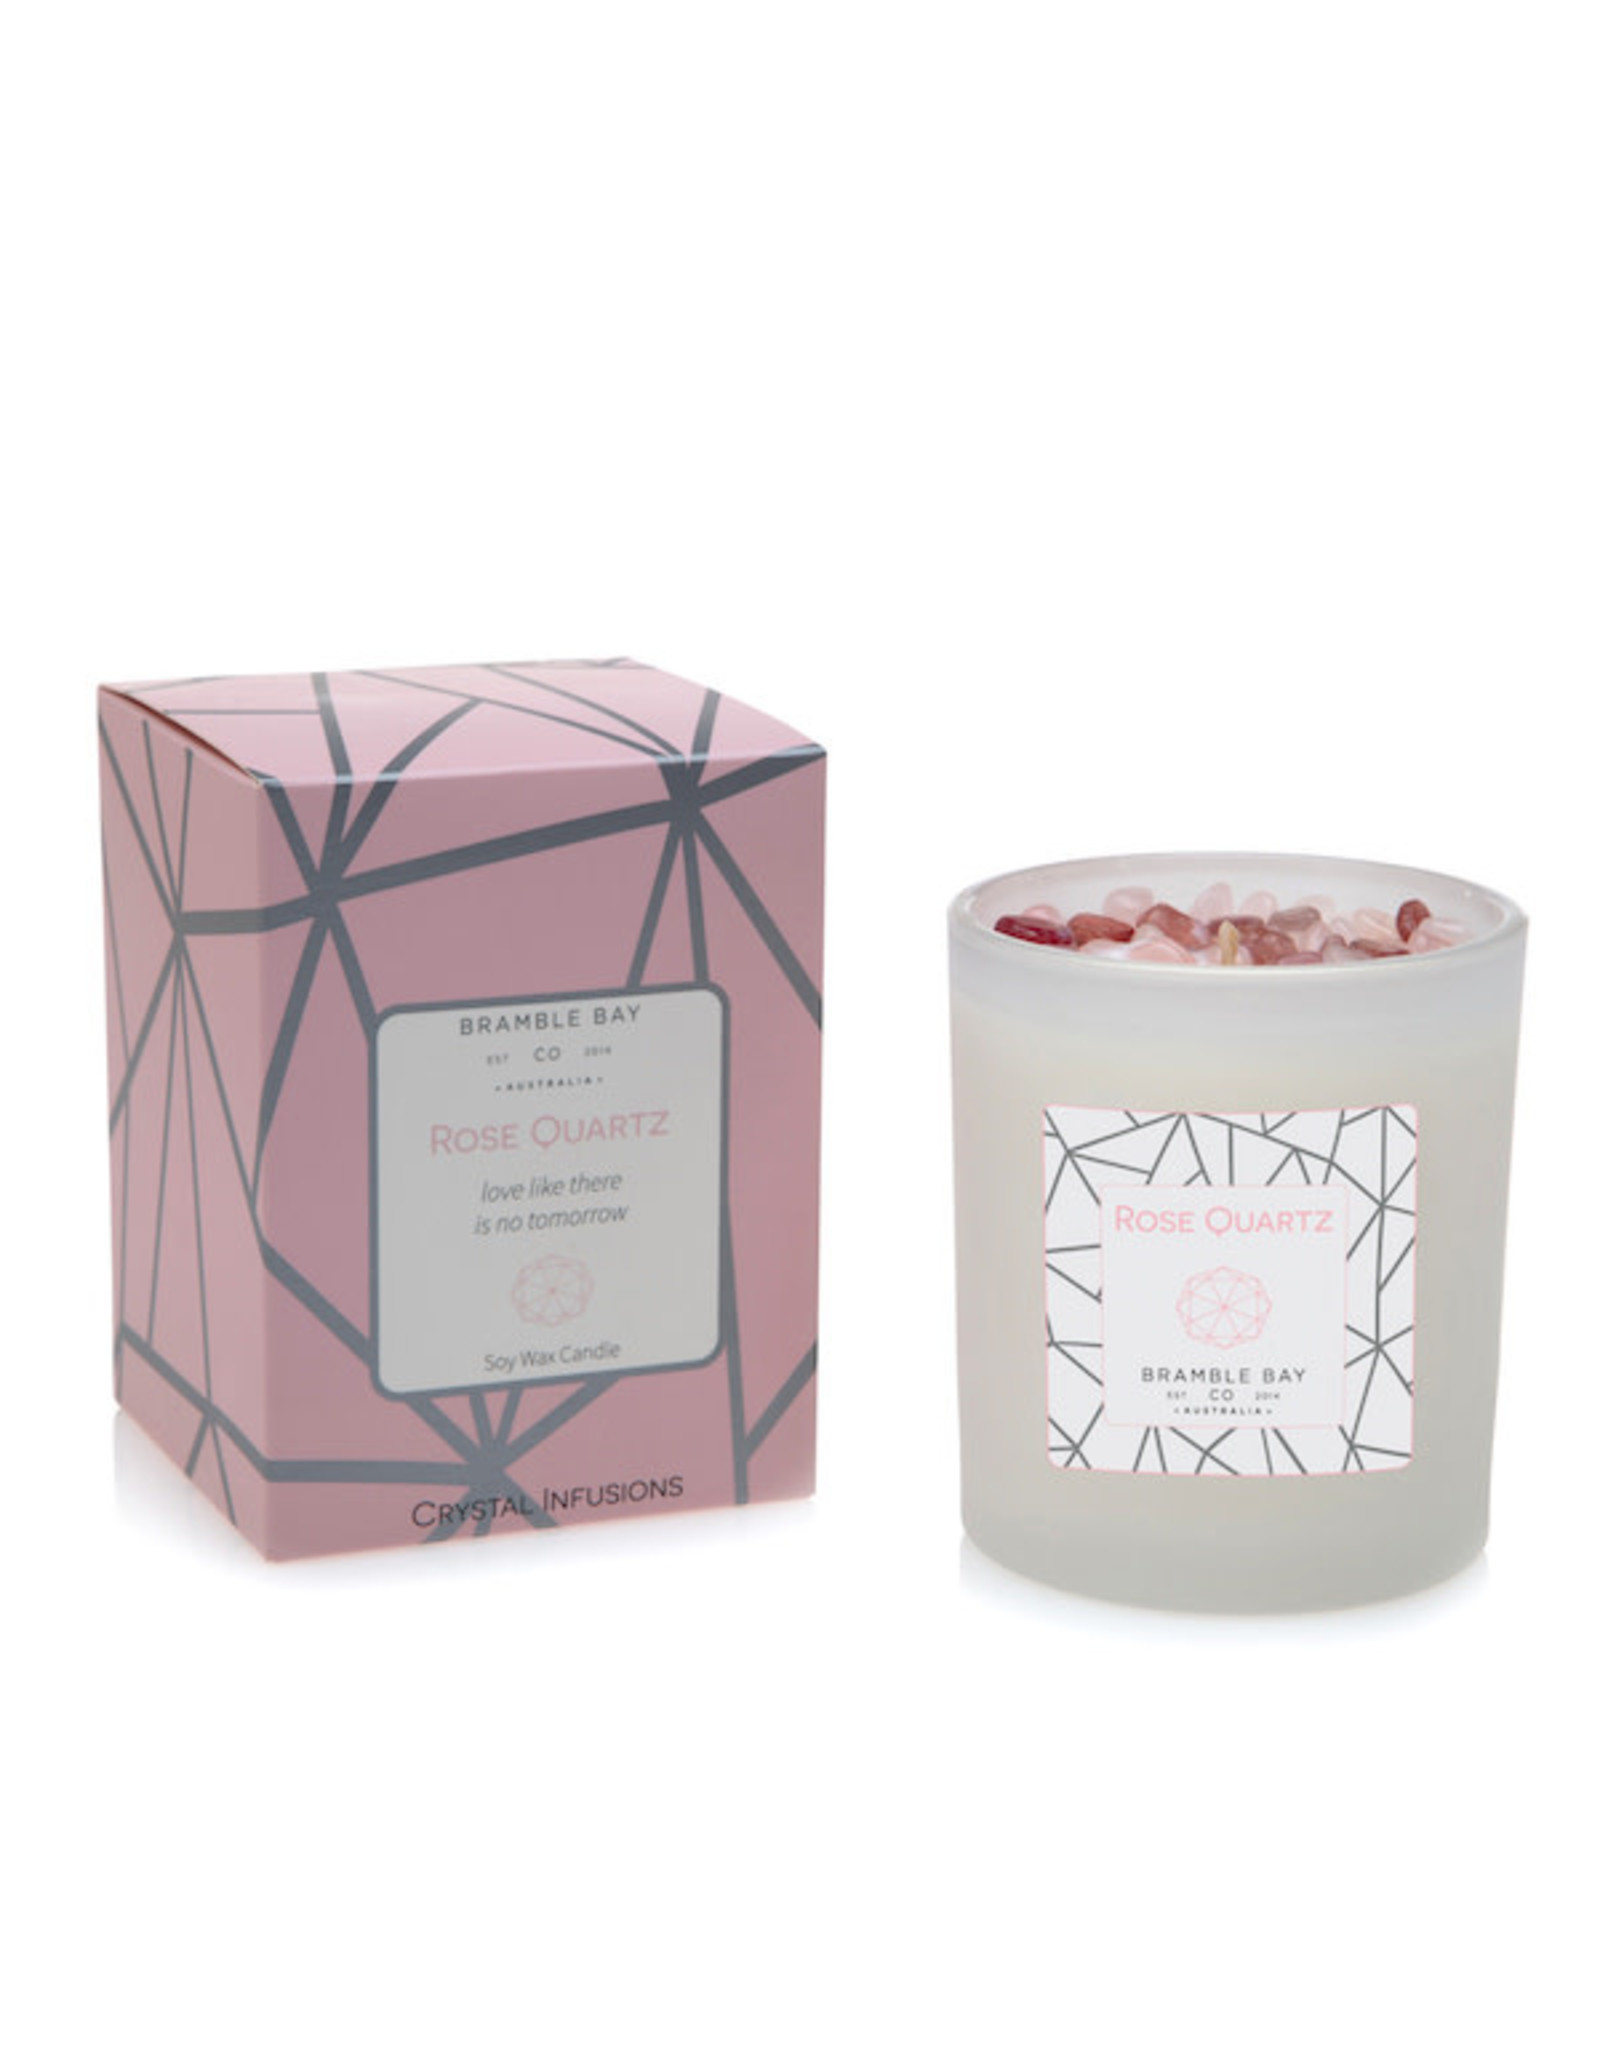 Bramble Bay & Co Crystal Infusions Candle